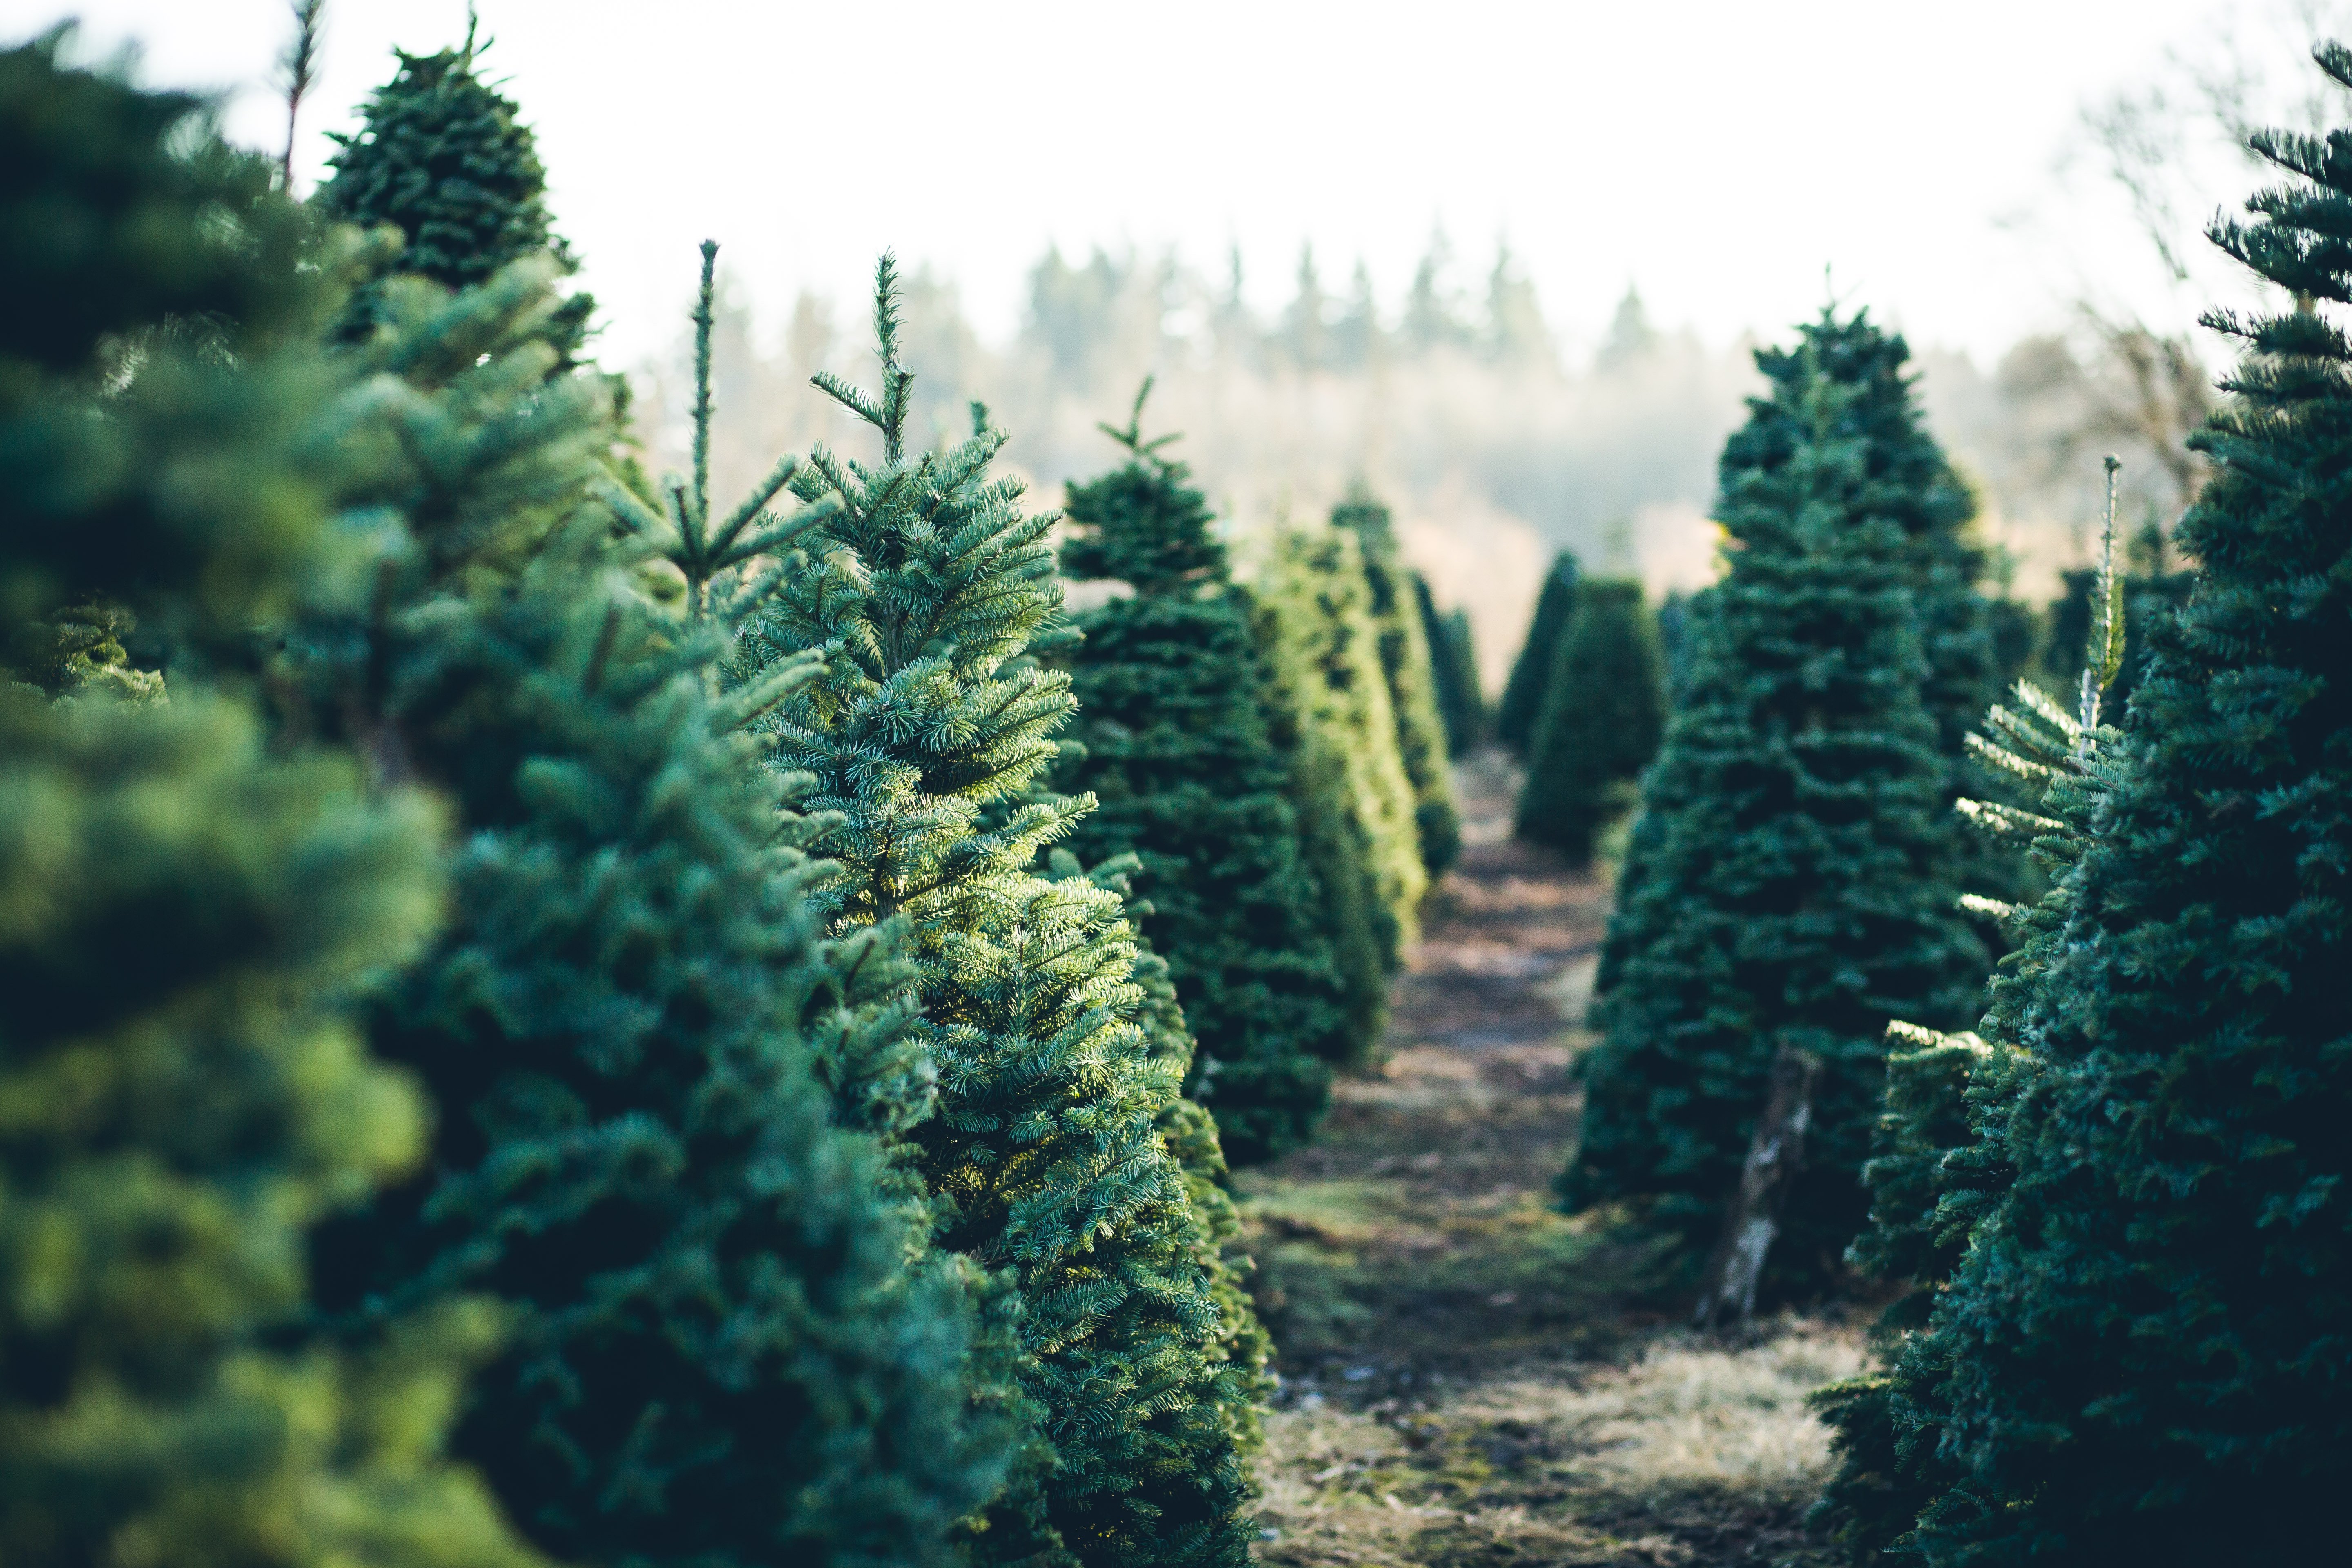 Trees in Rows at a Christmas Tree Farm | Photo: Shutterstock.com